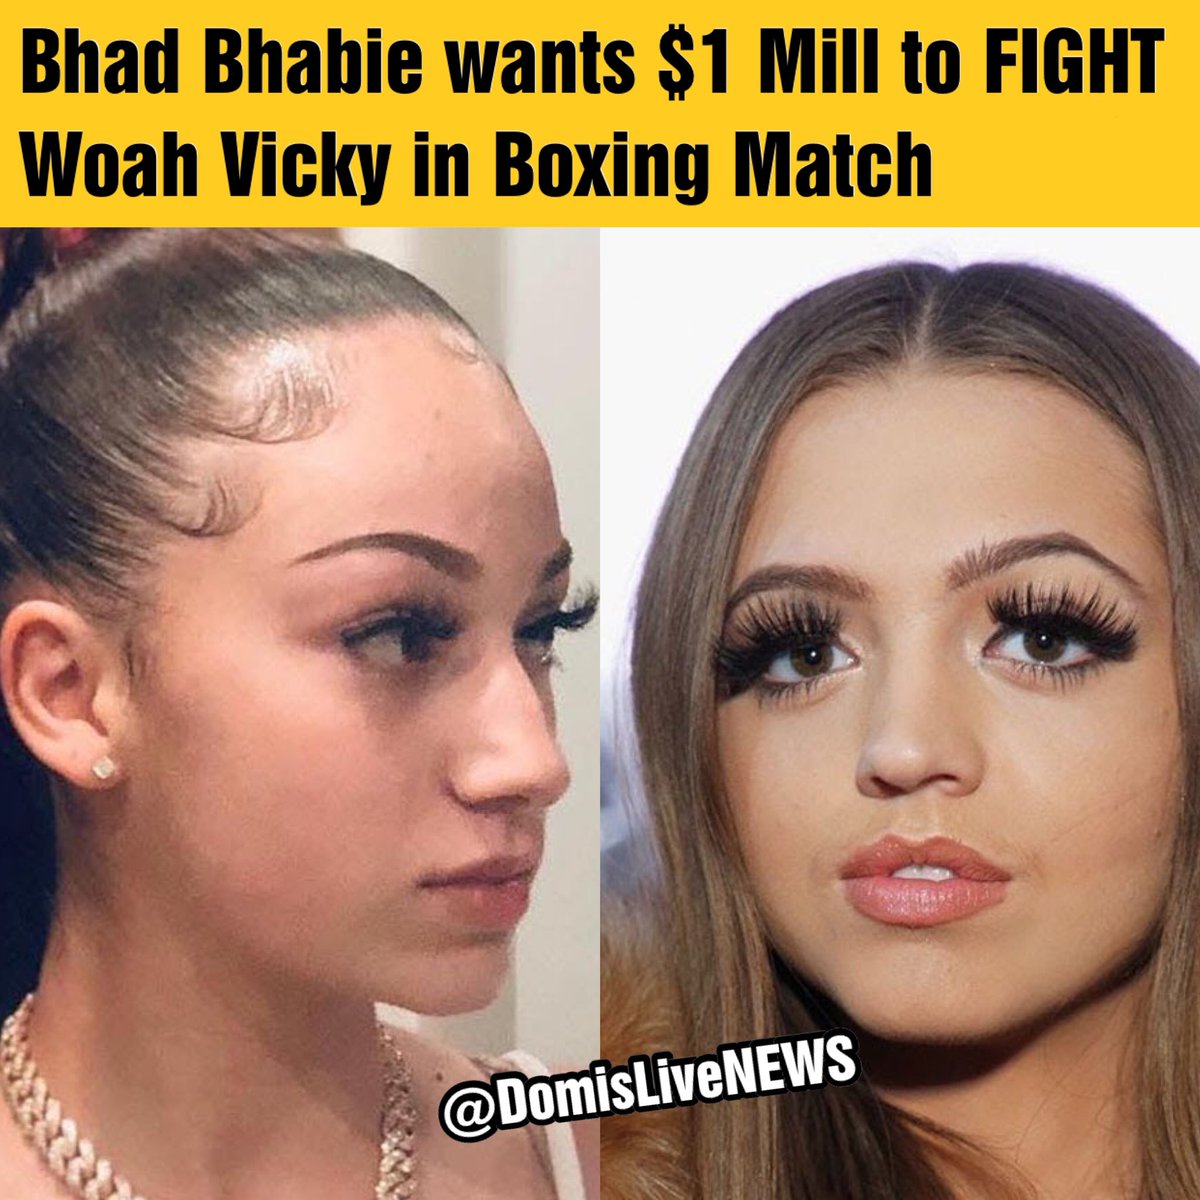 Would Bhad Bhabie Vs Woah Vicky be the next fight to watch after #KSIvsLoganPaul2 ?